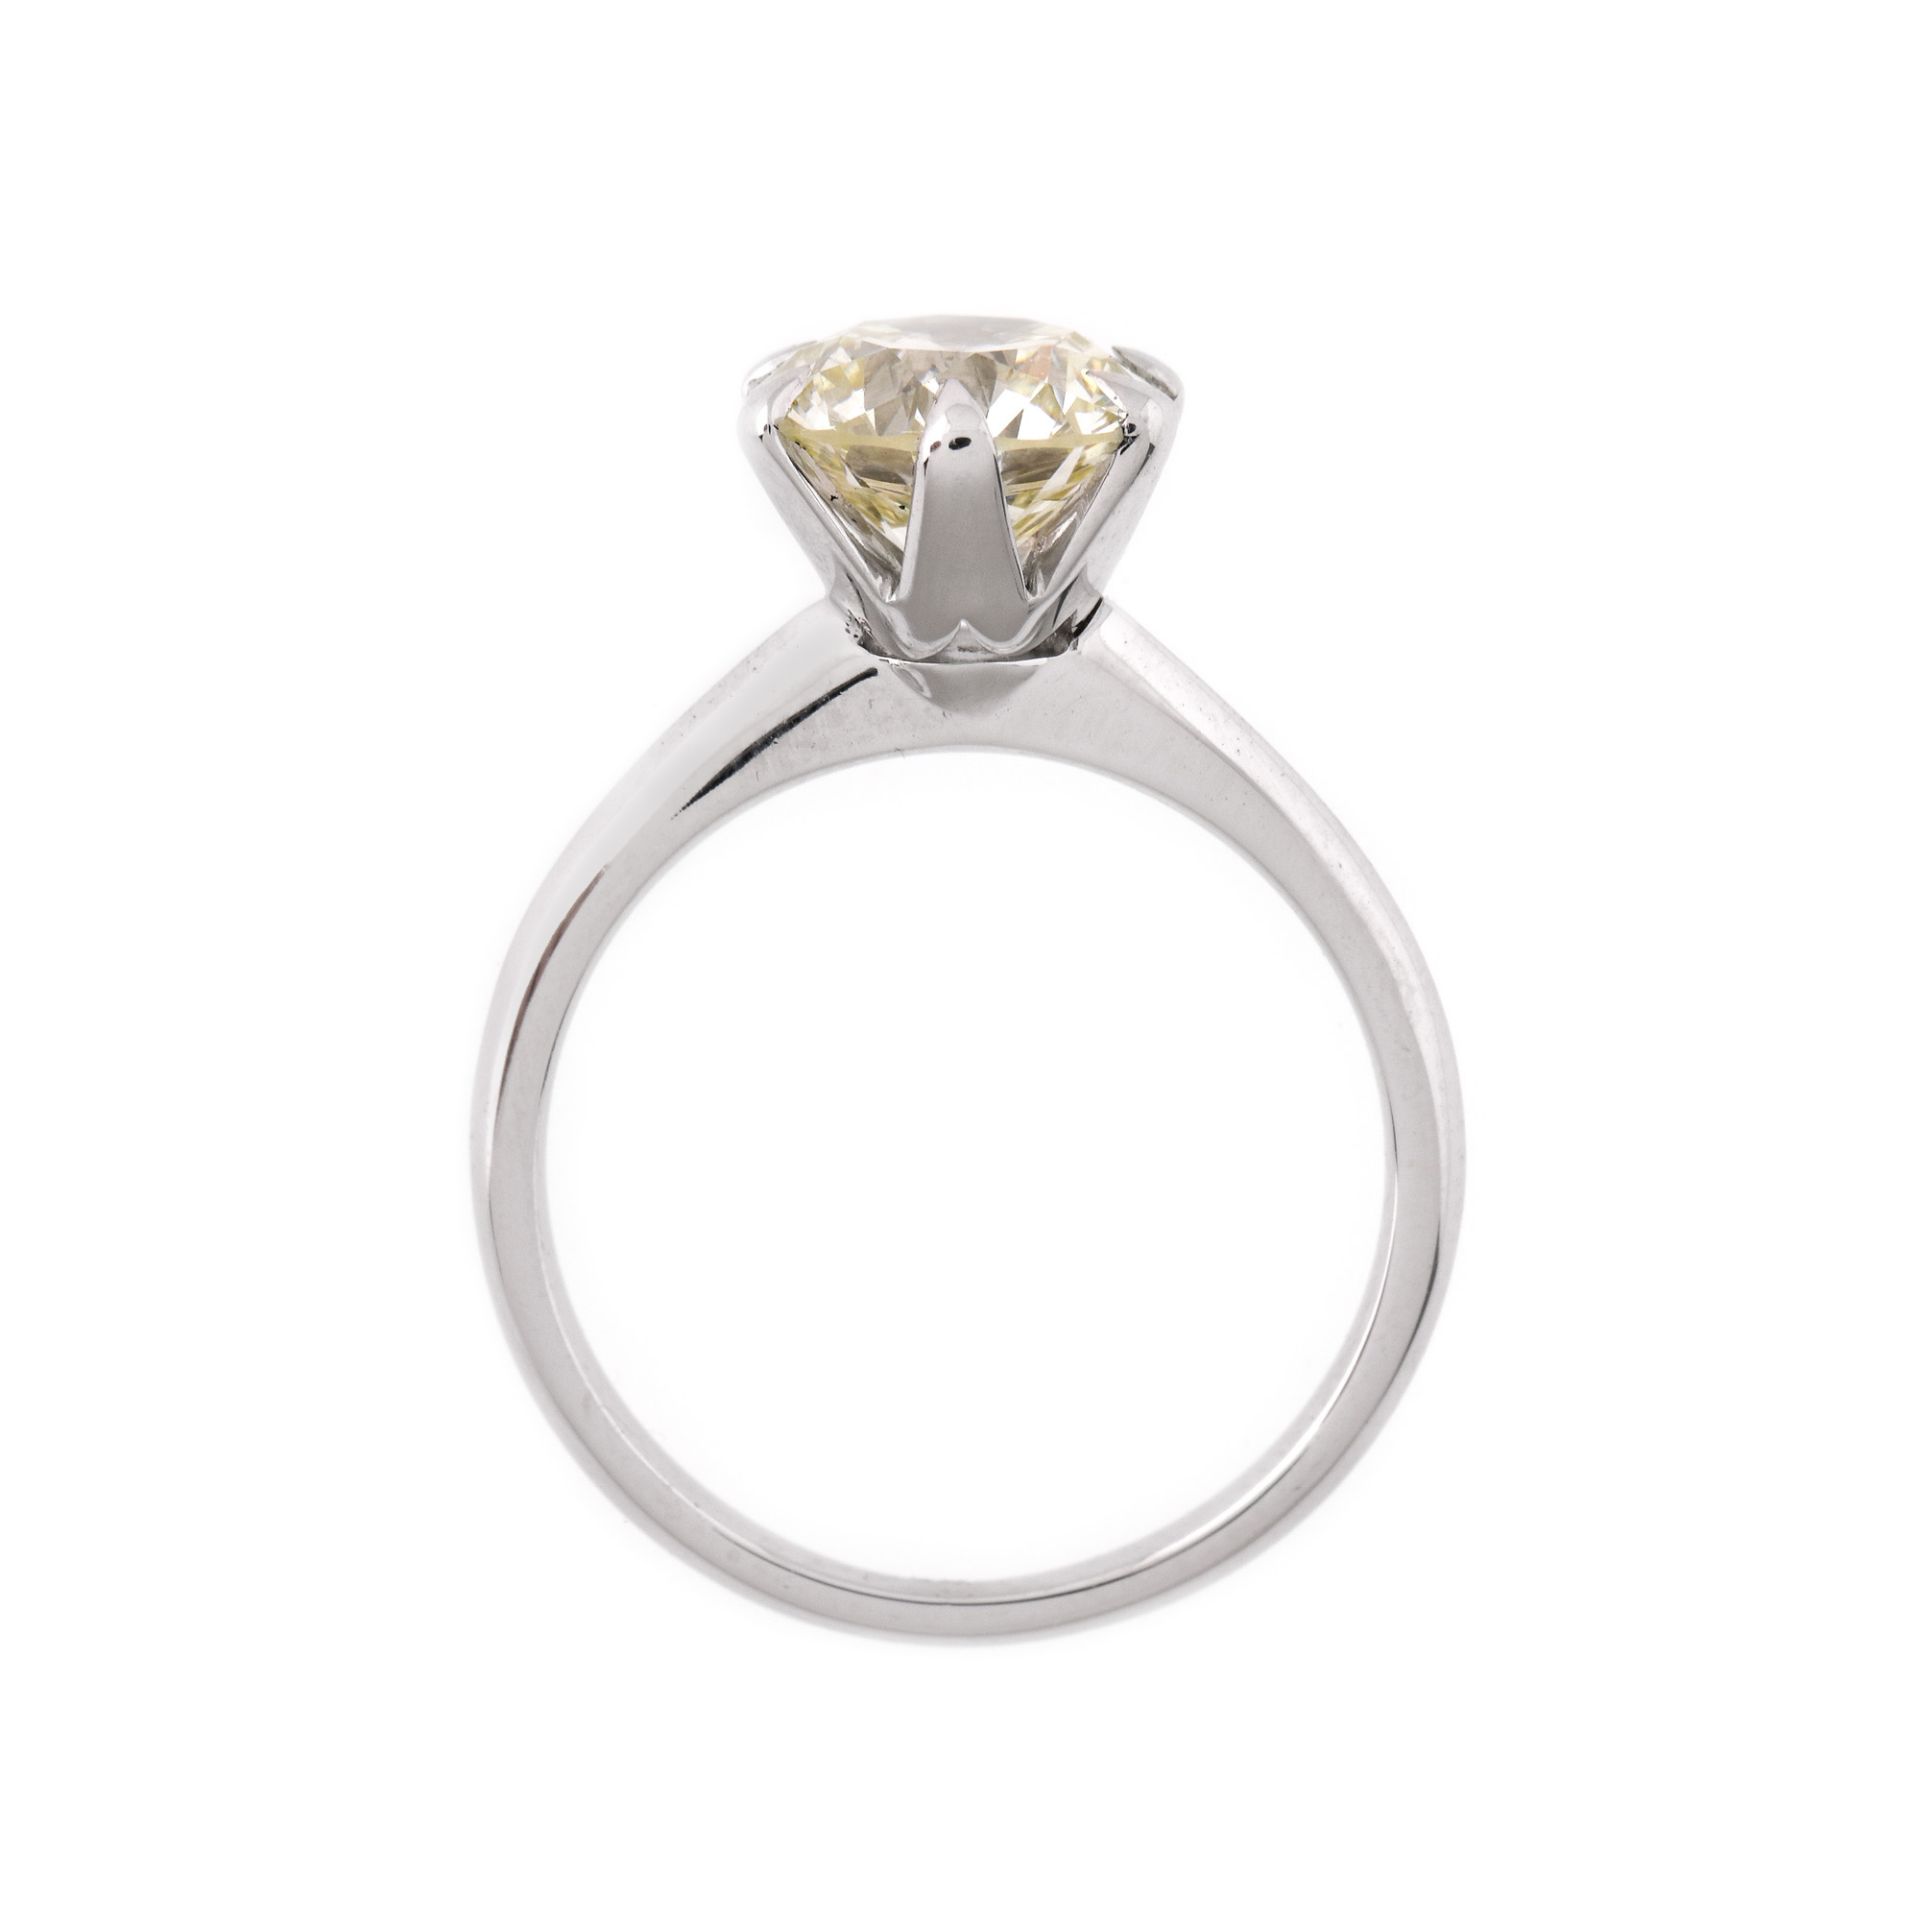 White gold ring, adorned with a solitaire diamond - Image 3 of 3